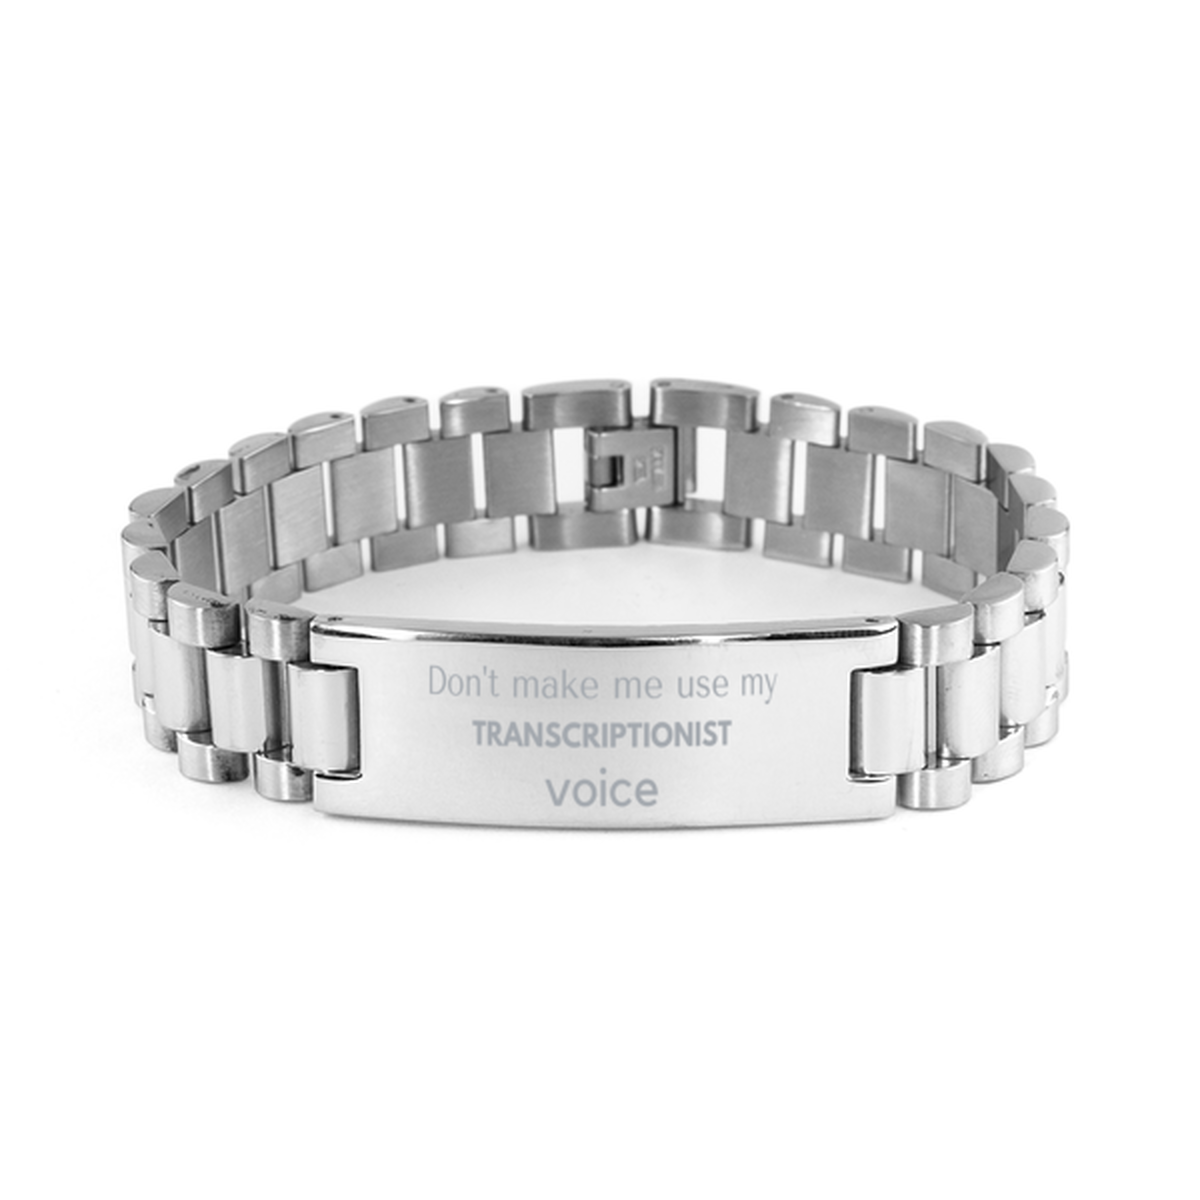 Don't make me use my Transcriptionist voice, Sarcasm Transcriptionist Gifts, Christmas Transcriptionist Ladder Stainless Steel Bracelet Birthday Unique Gifts For Transcriptionist Coworkers, Men, Women, Colleague, Friends